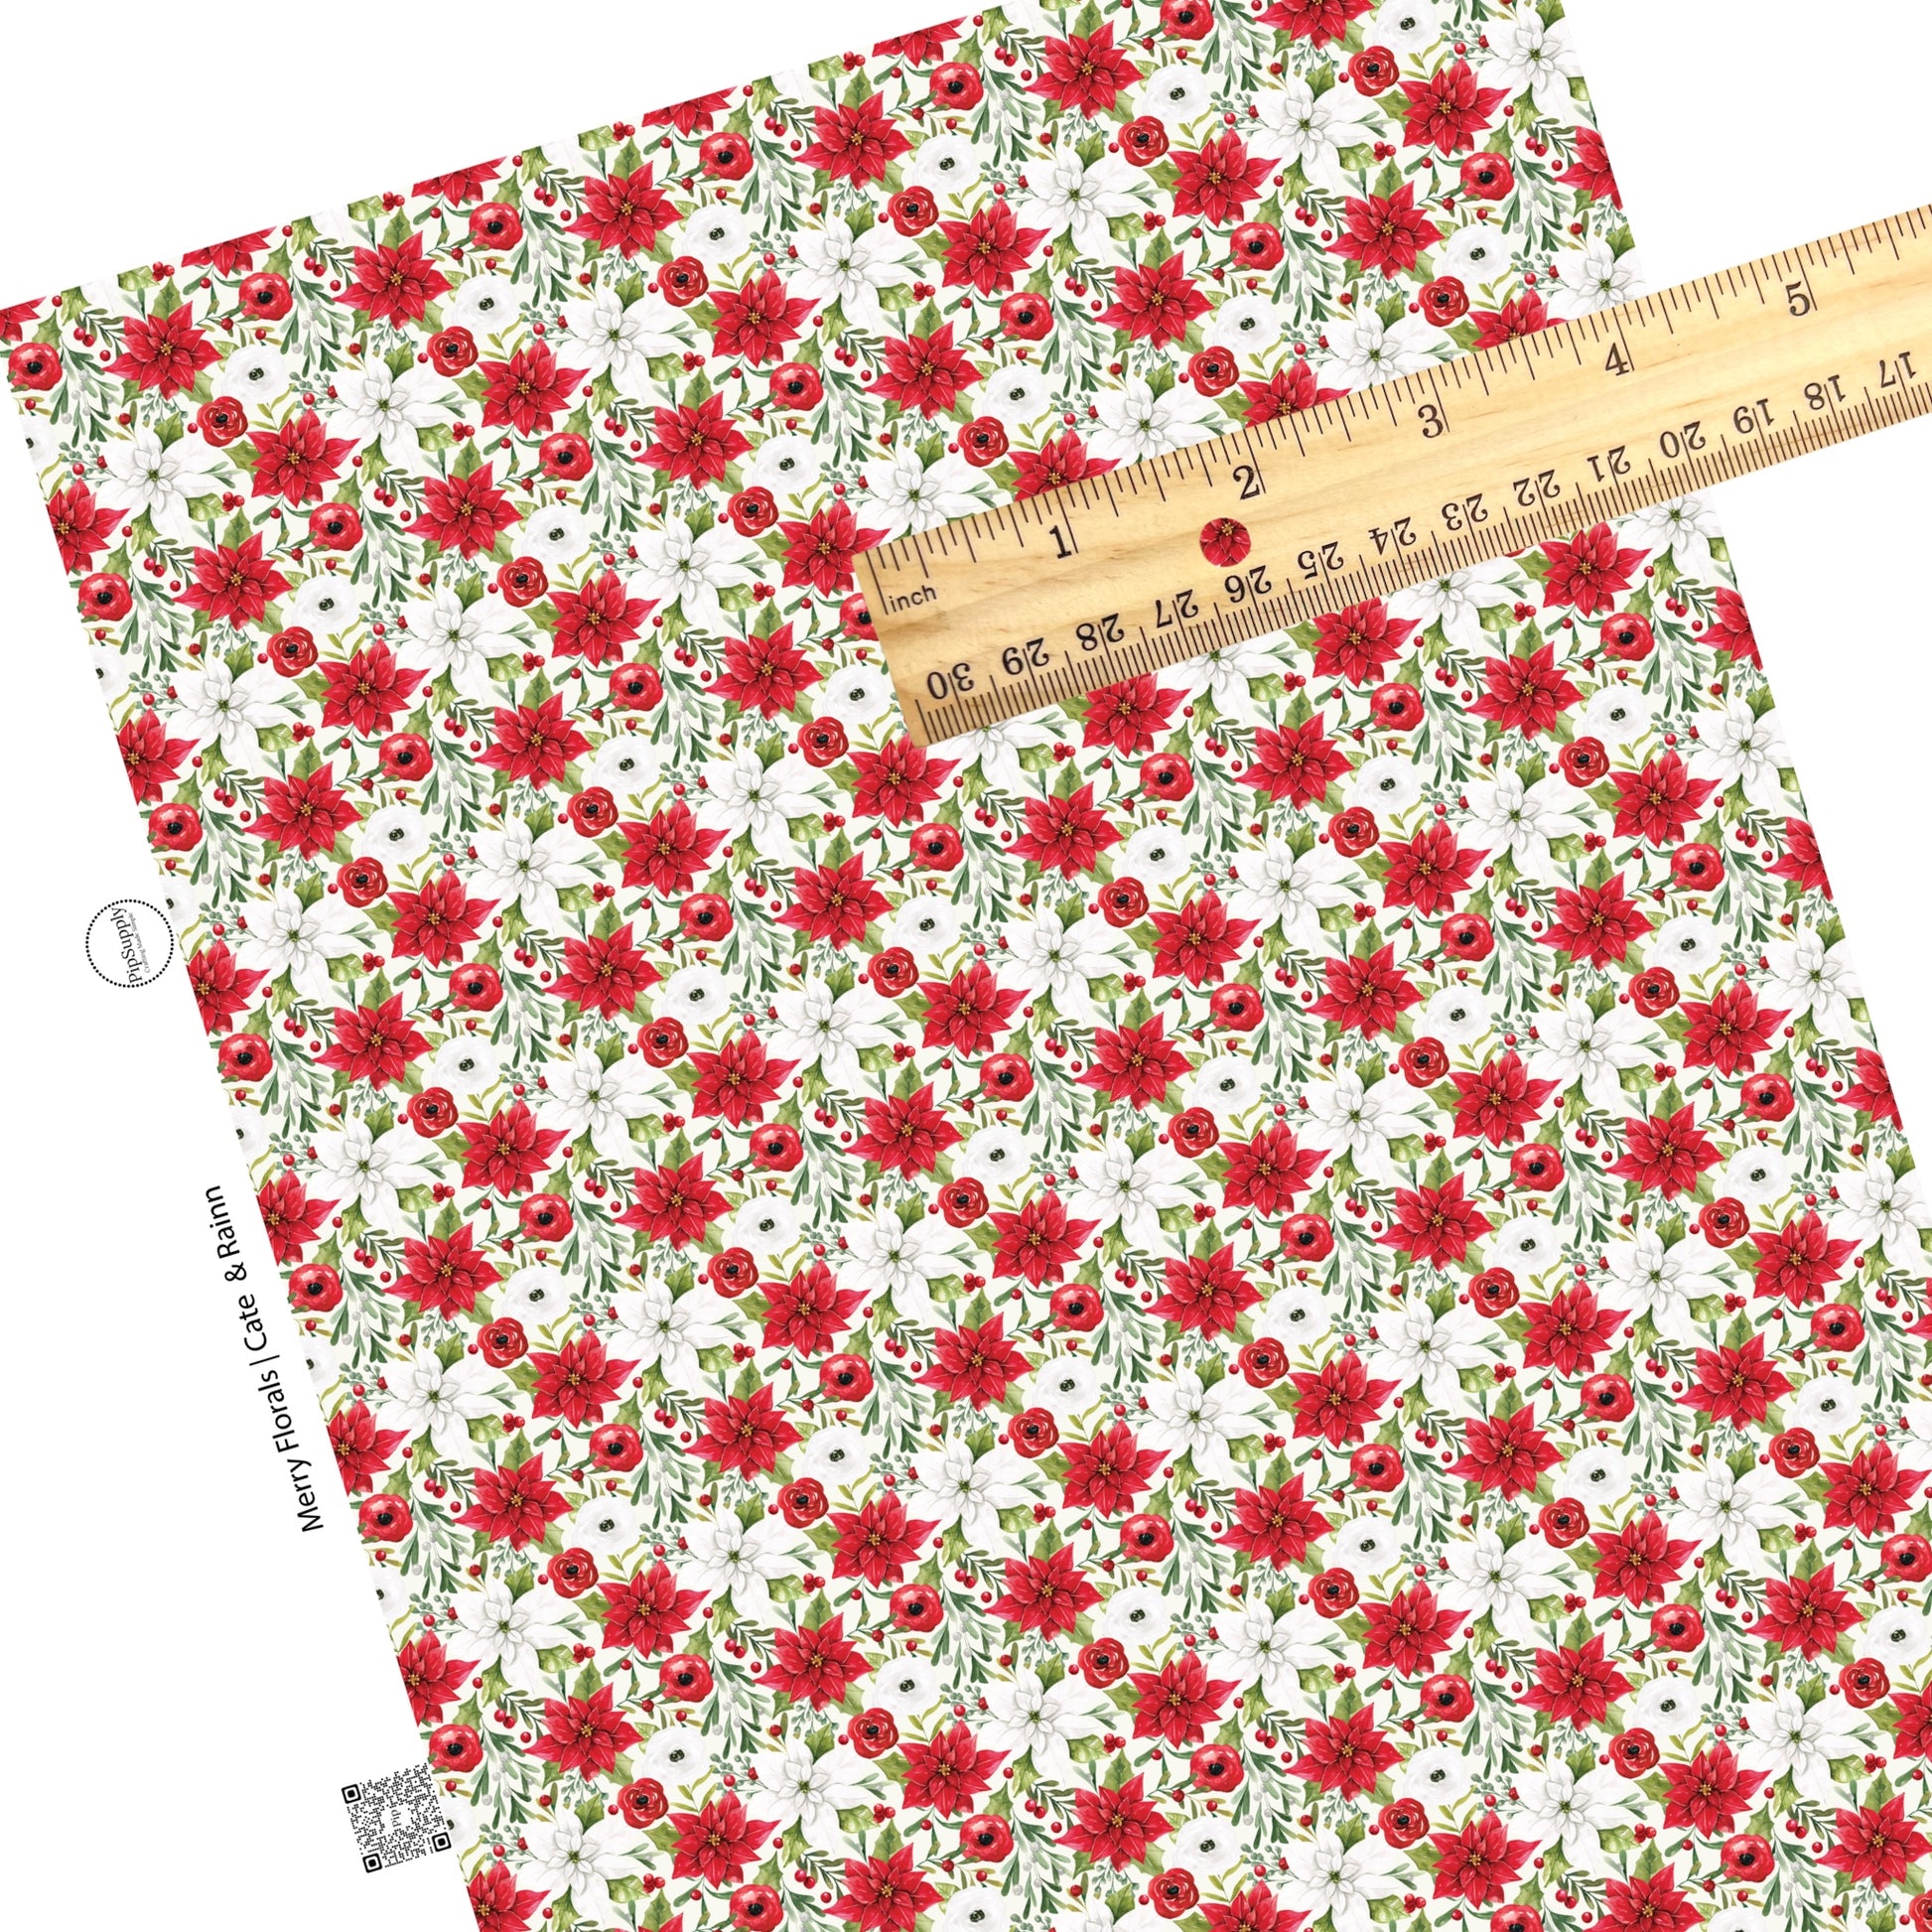 Berries with red and white flowers on white faux leather sheet